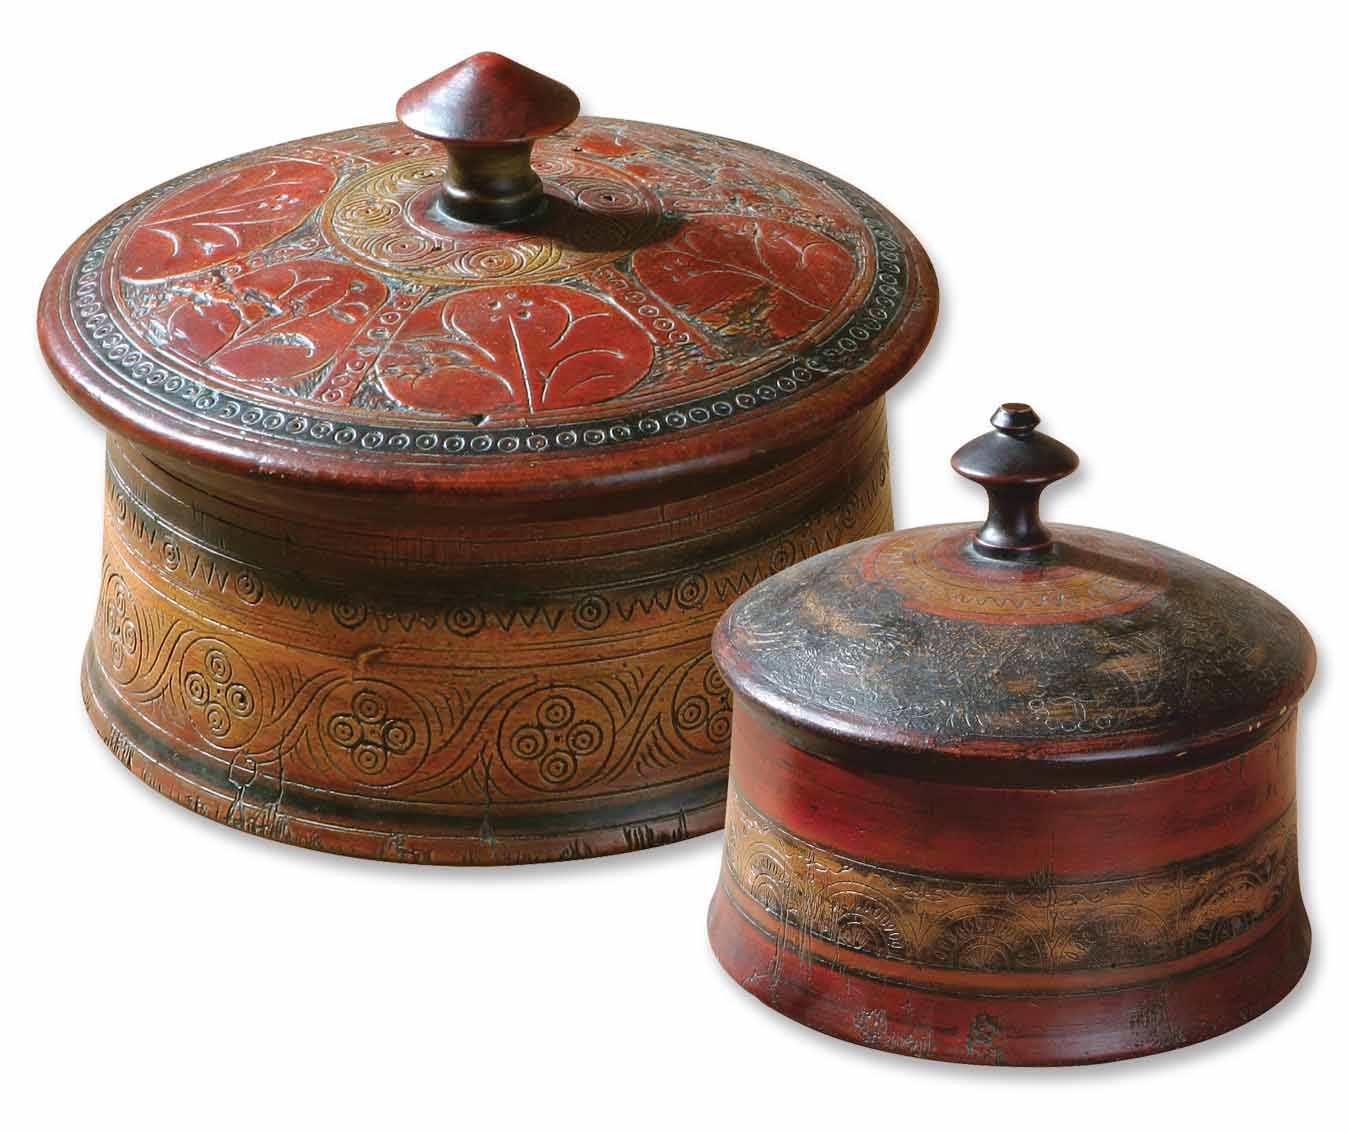 Uttermost Sherpa Decorative Boxes - Set of 2